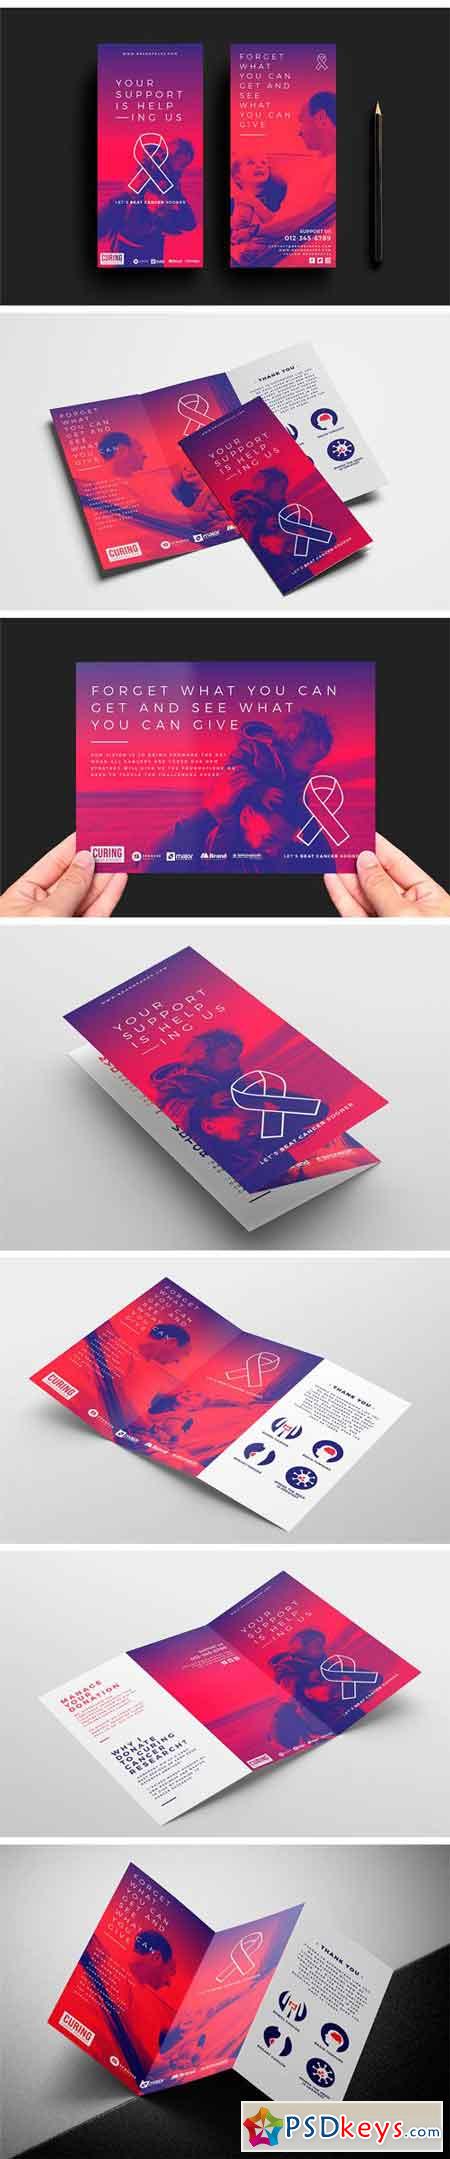 Cancer Charity Templates Pack 1880741